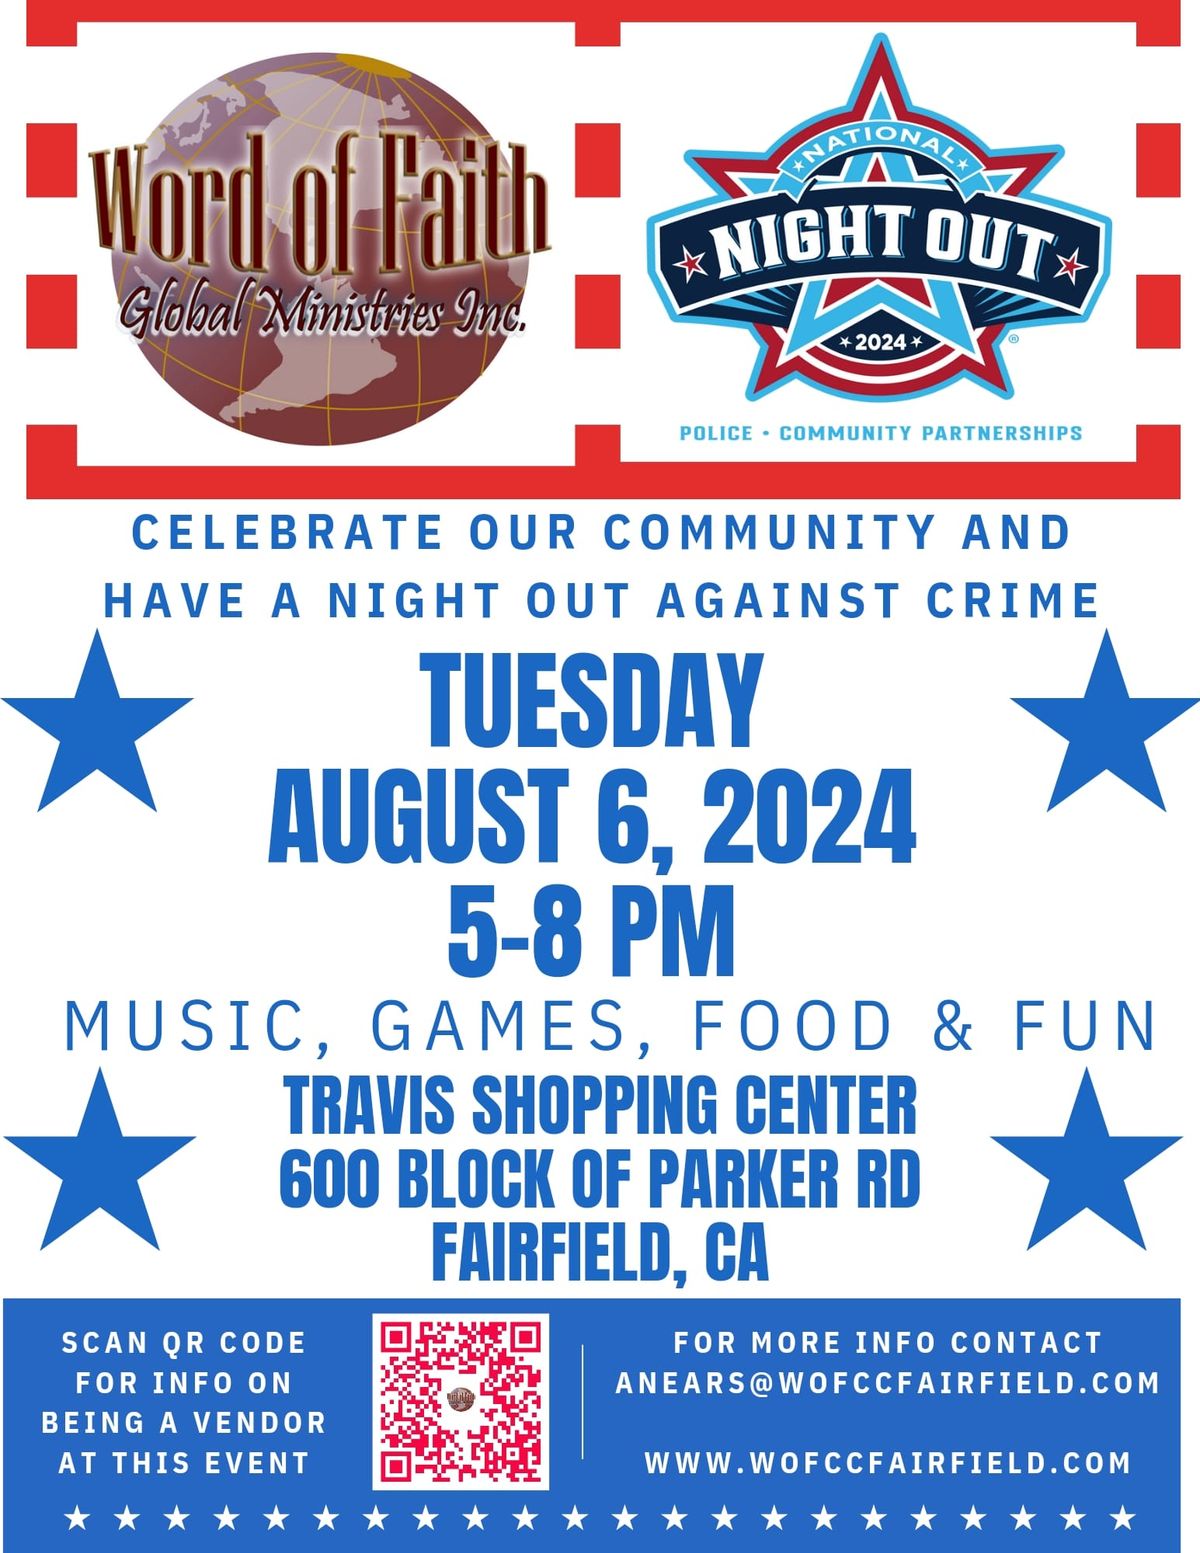 WOF National Night Out 2024